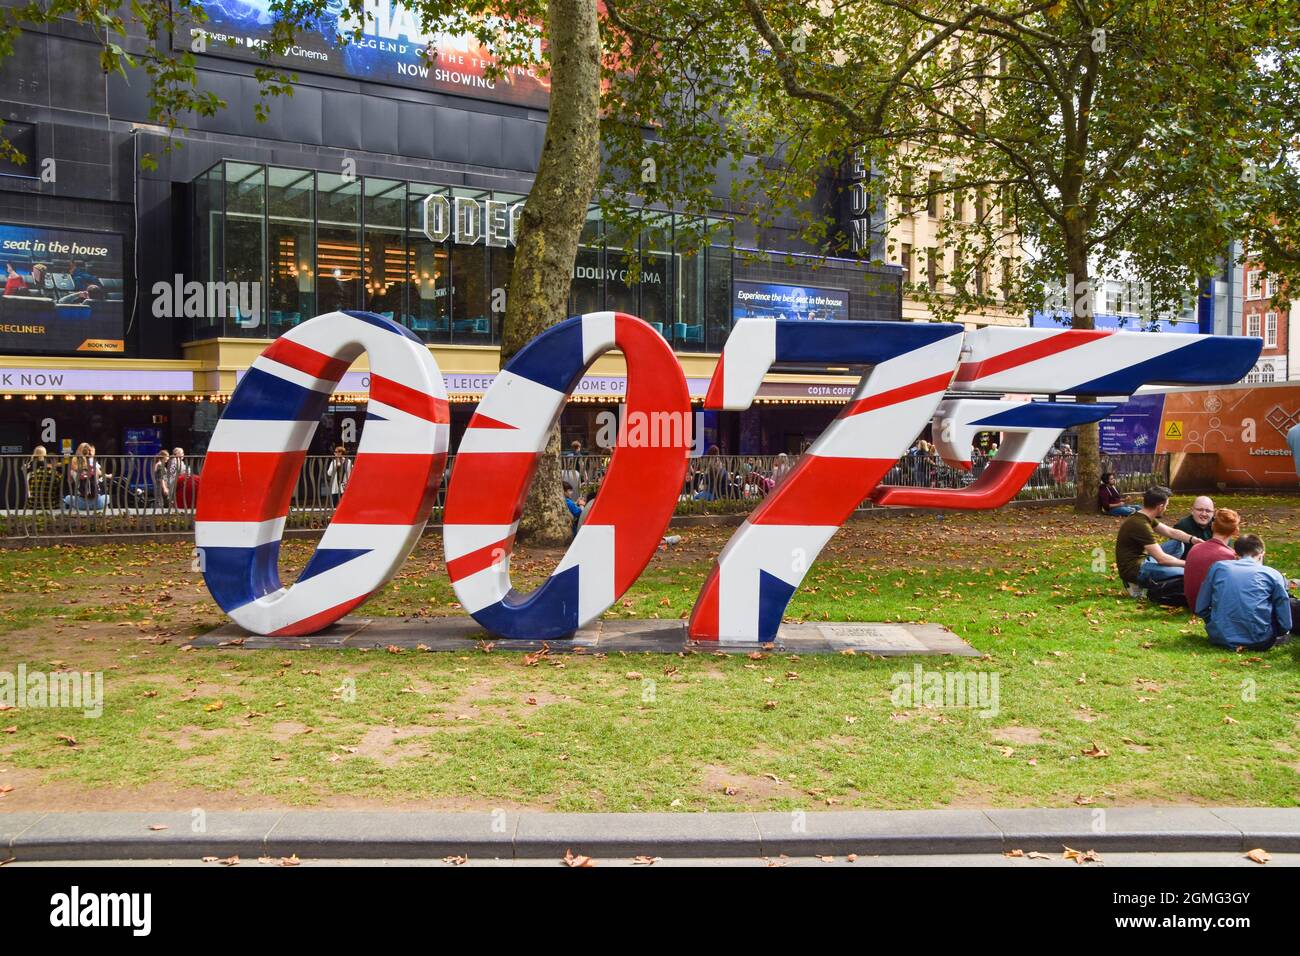 London, United Kingdom. 18th September 2021. The famous 007 logo was unveiled in Leicester Square ahead of the release of the latest James Bond movie, No Time To Die, which opens in the UK on 30 September 2021. Credit: Vuk Valcic / Alamy Live News Stock Photo